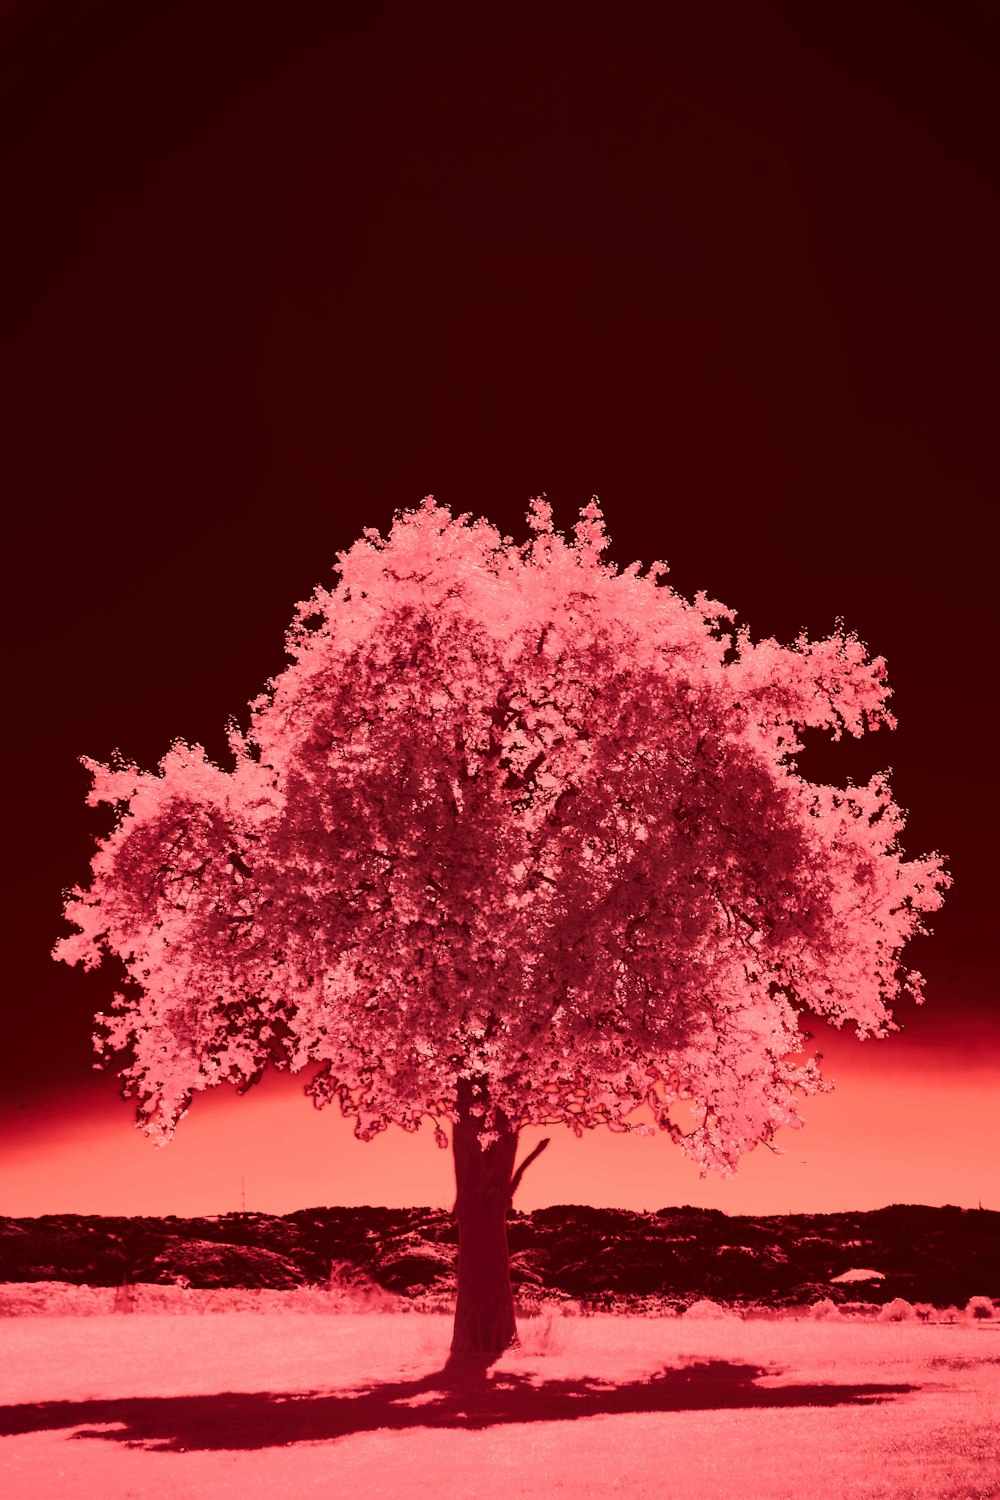 a tree in a field with a red sky in the background